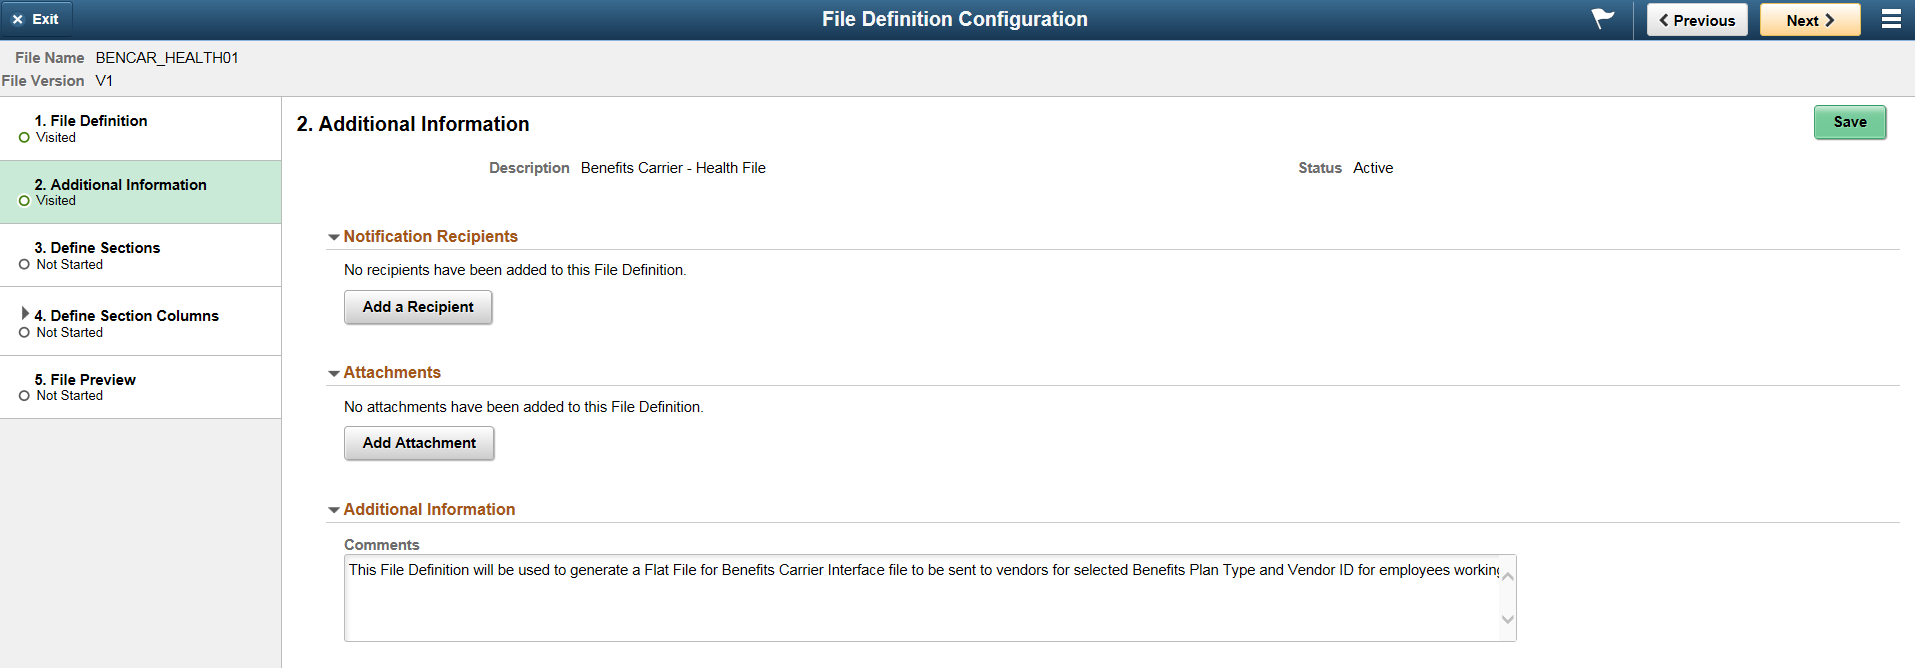 File Definition Configuration - Additional Information Page